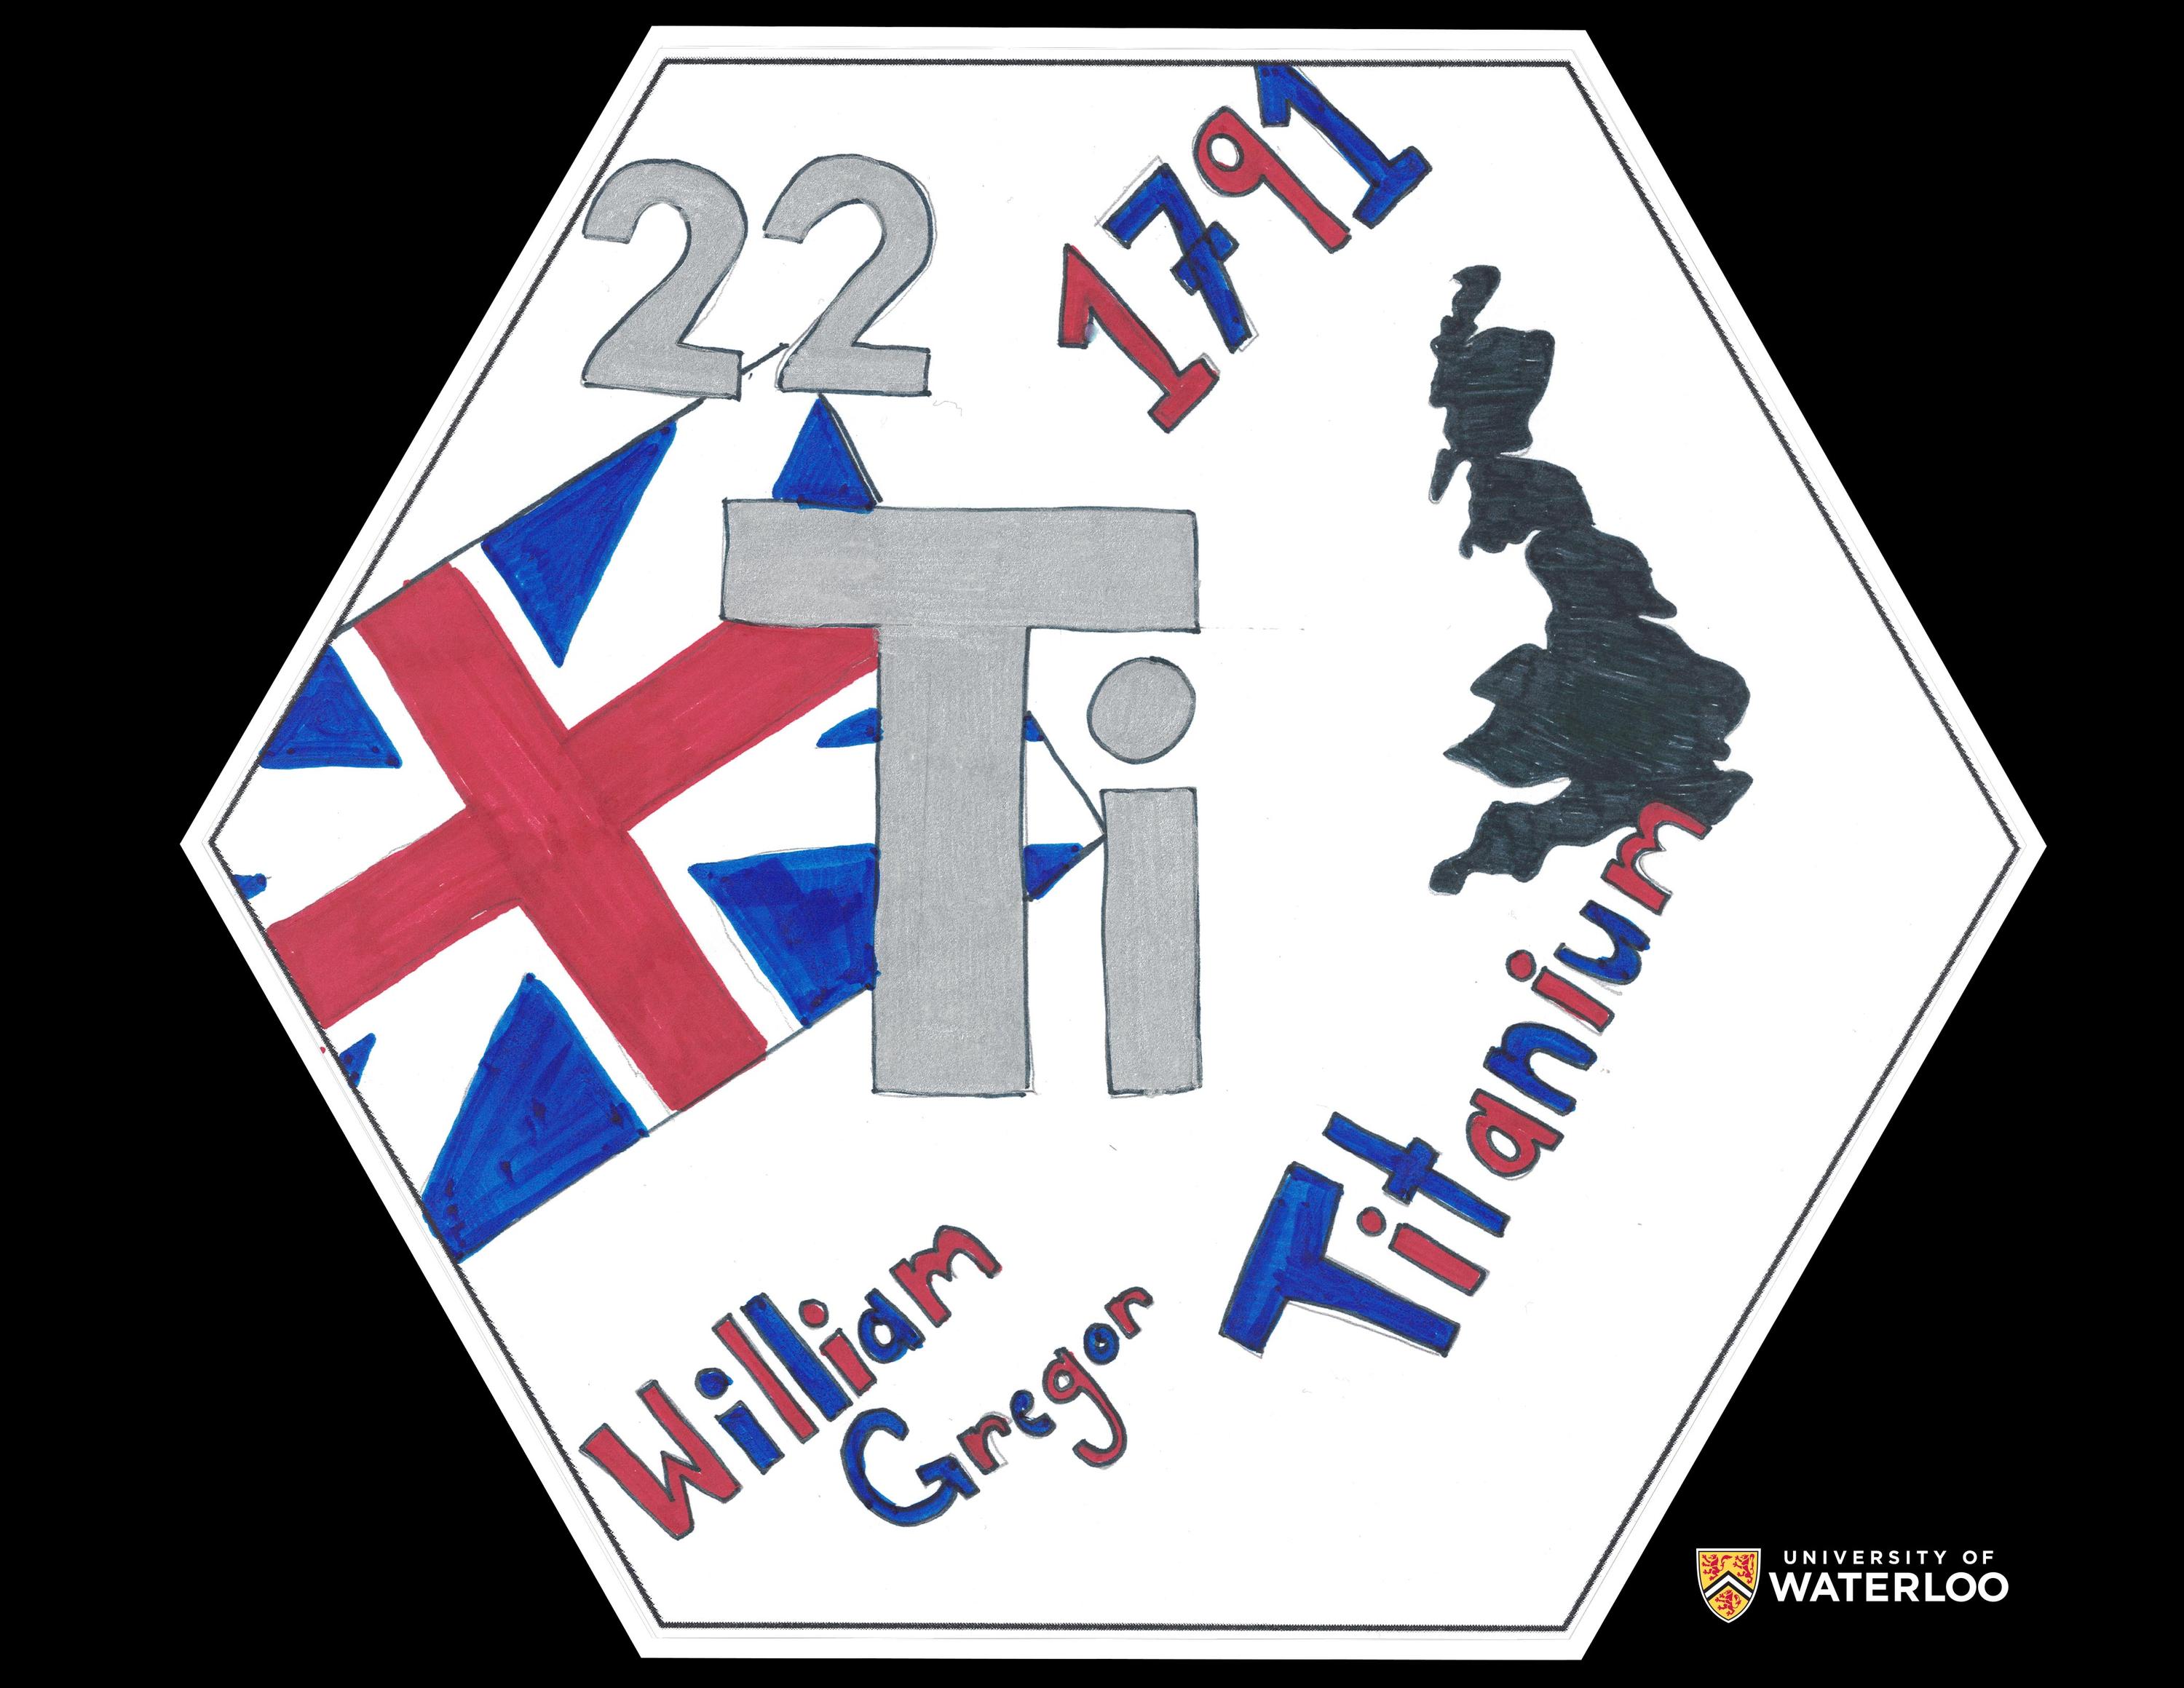 Ink on paper. Chemical symbol “Ti” is at the centre of the tile surrounded by the atomic number 22, both in in silver lettering. “William Gregor”, “Titanium”, and “1791” are all drawn in blue and red. A silhouette of the British mainland appears right with the UK national flag left.